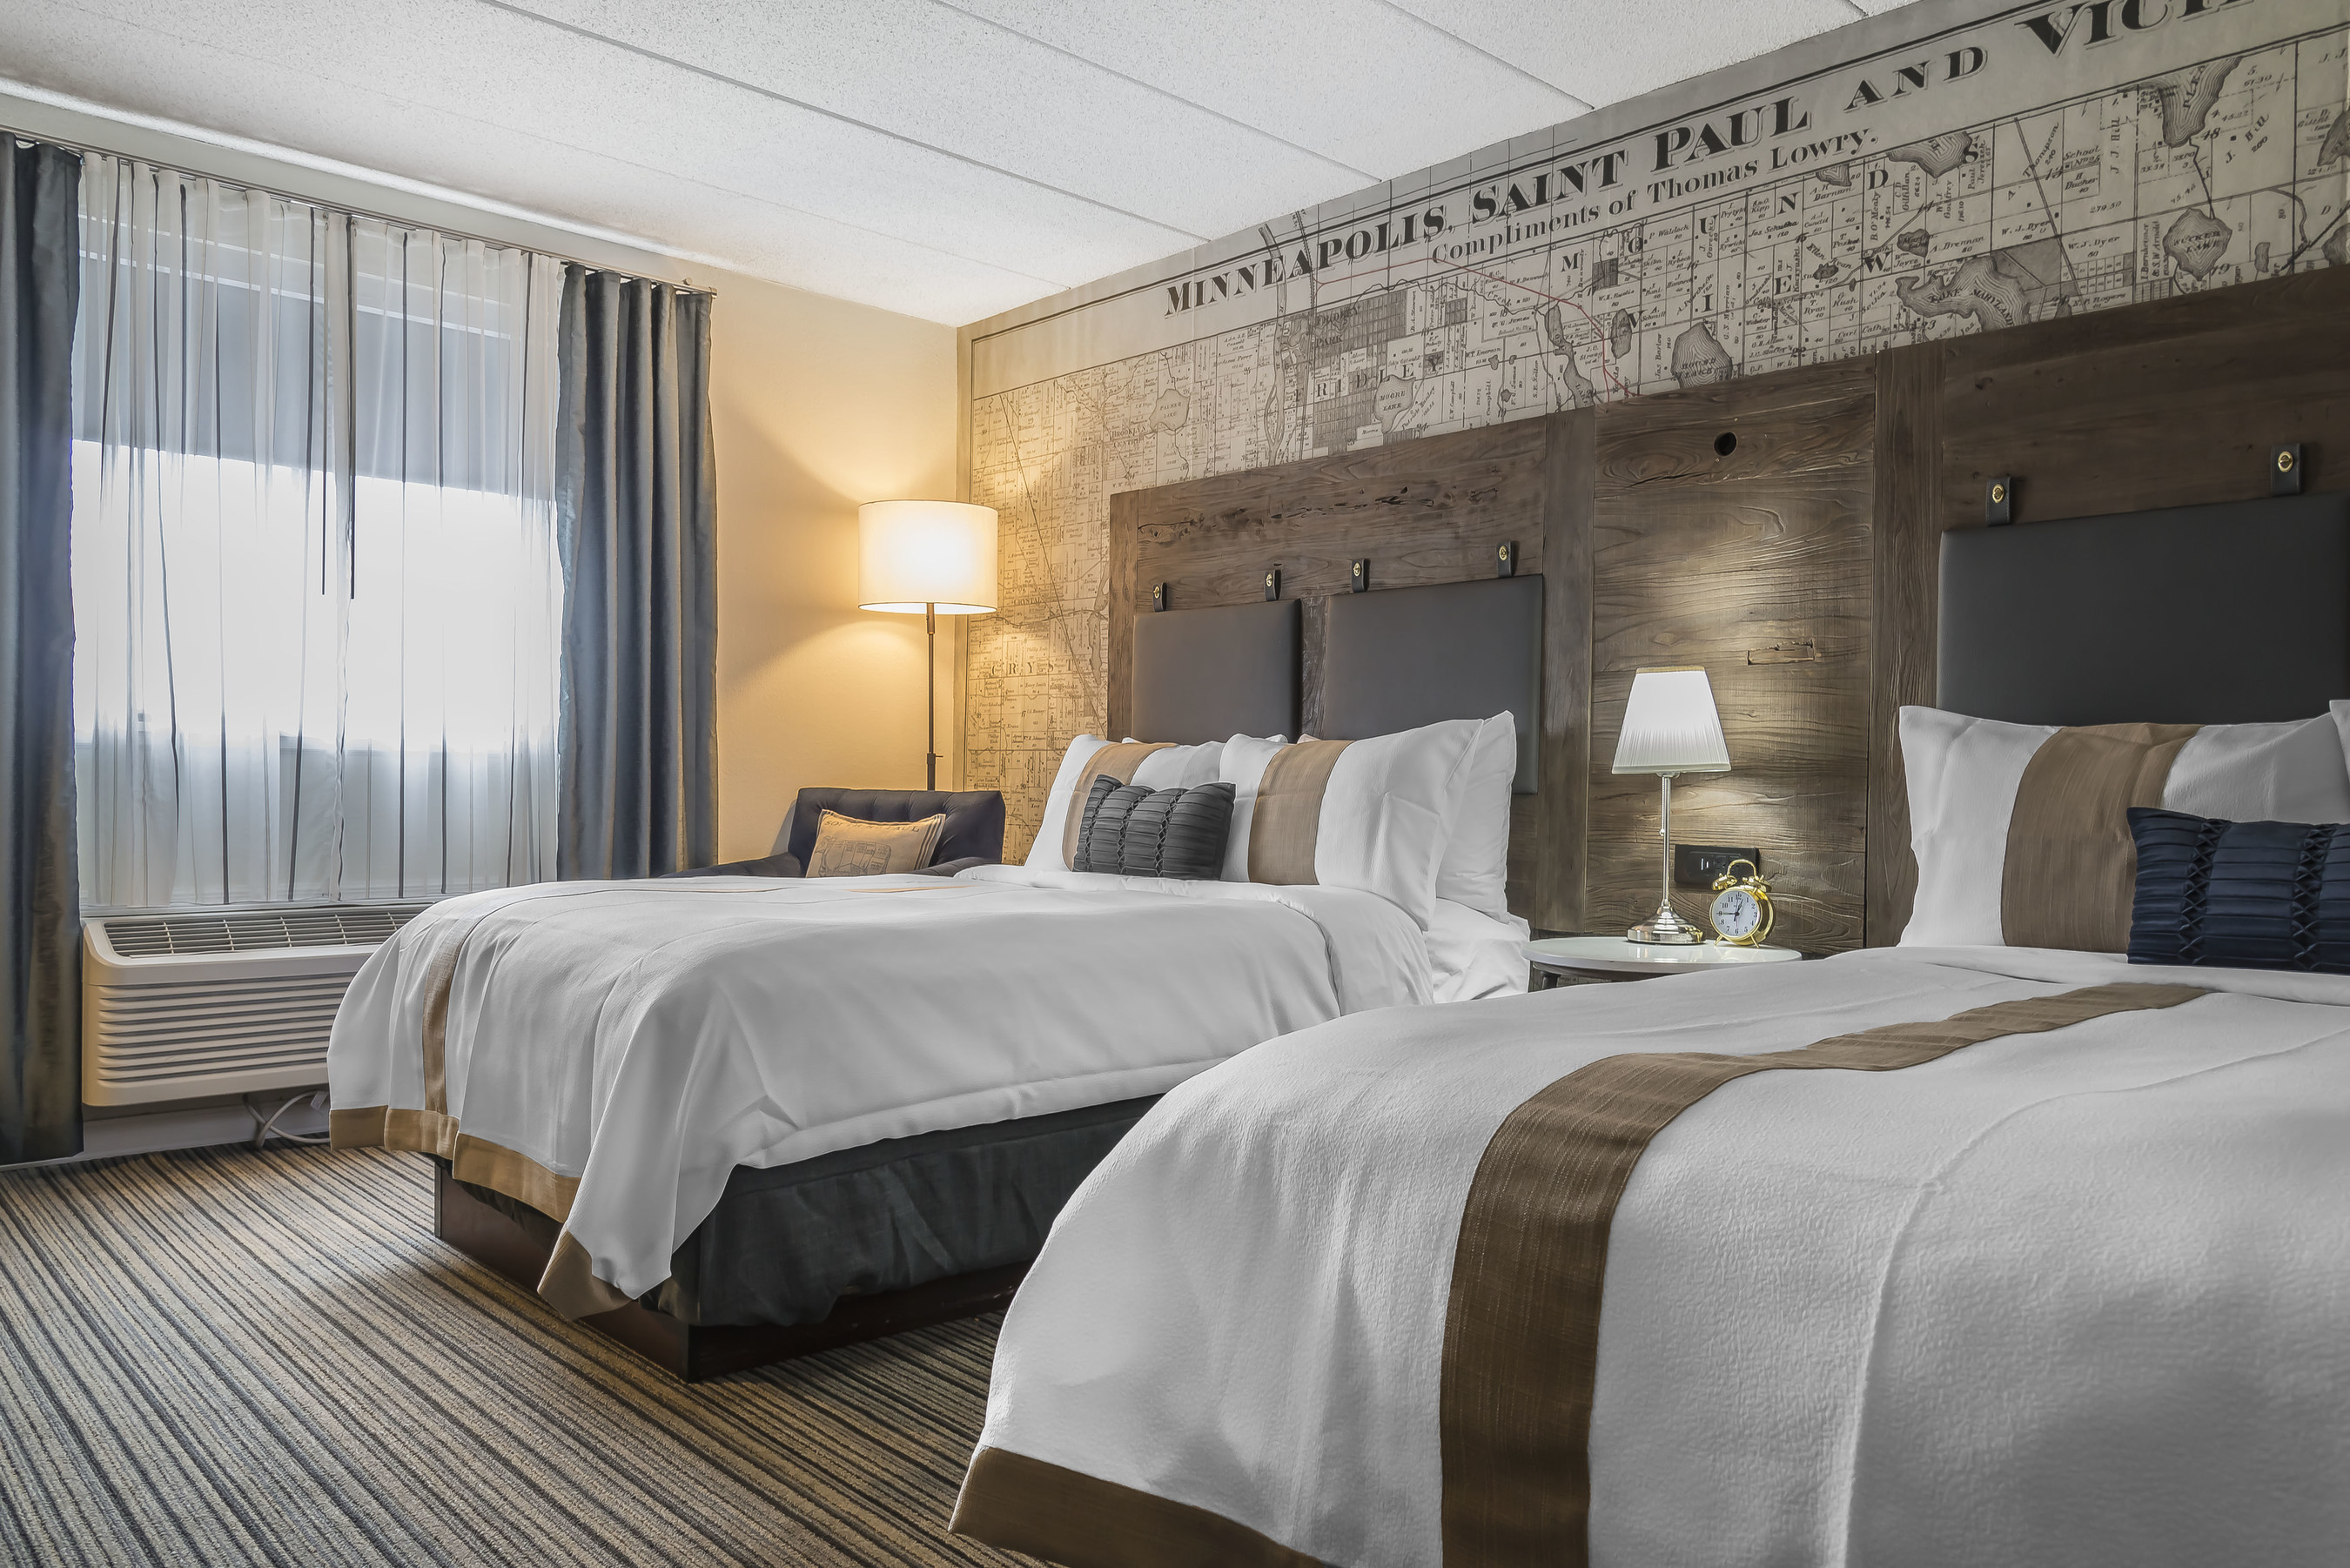 One of the 85 beautifully decorated guest rooms at the enVision Hotel St. Paul South, an Ascend Hotel Collection member.